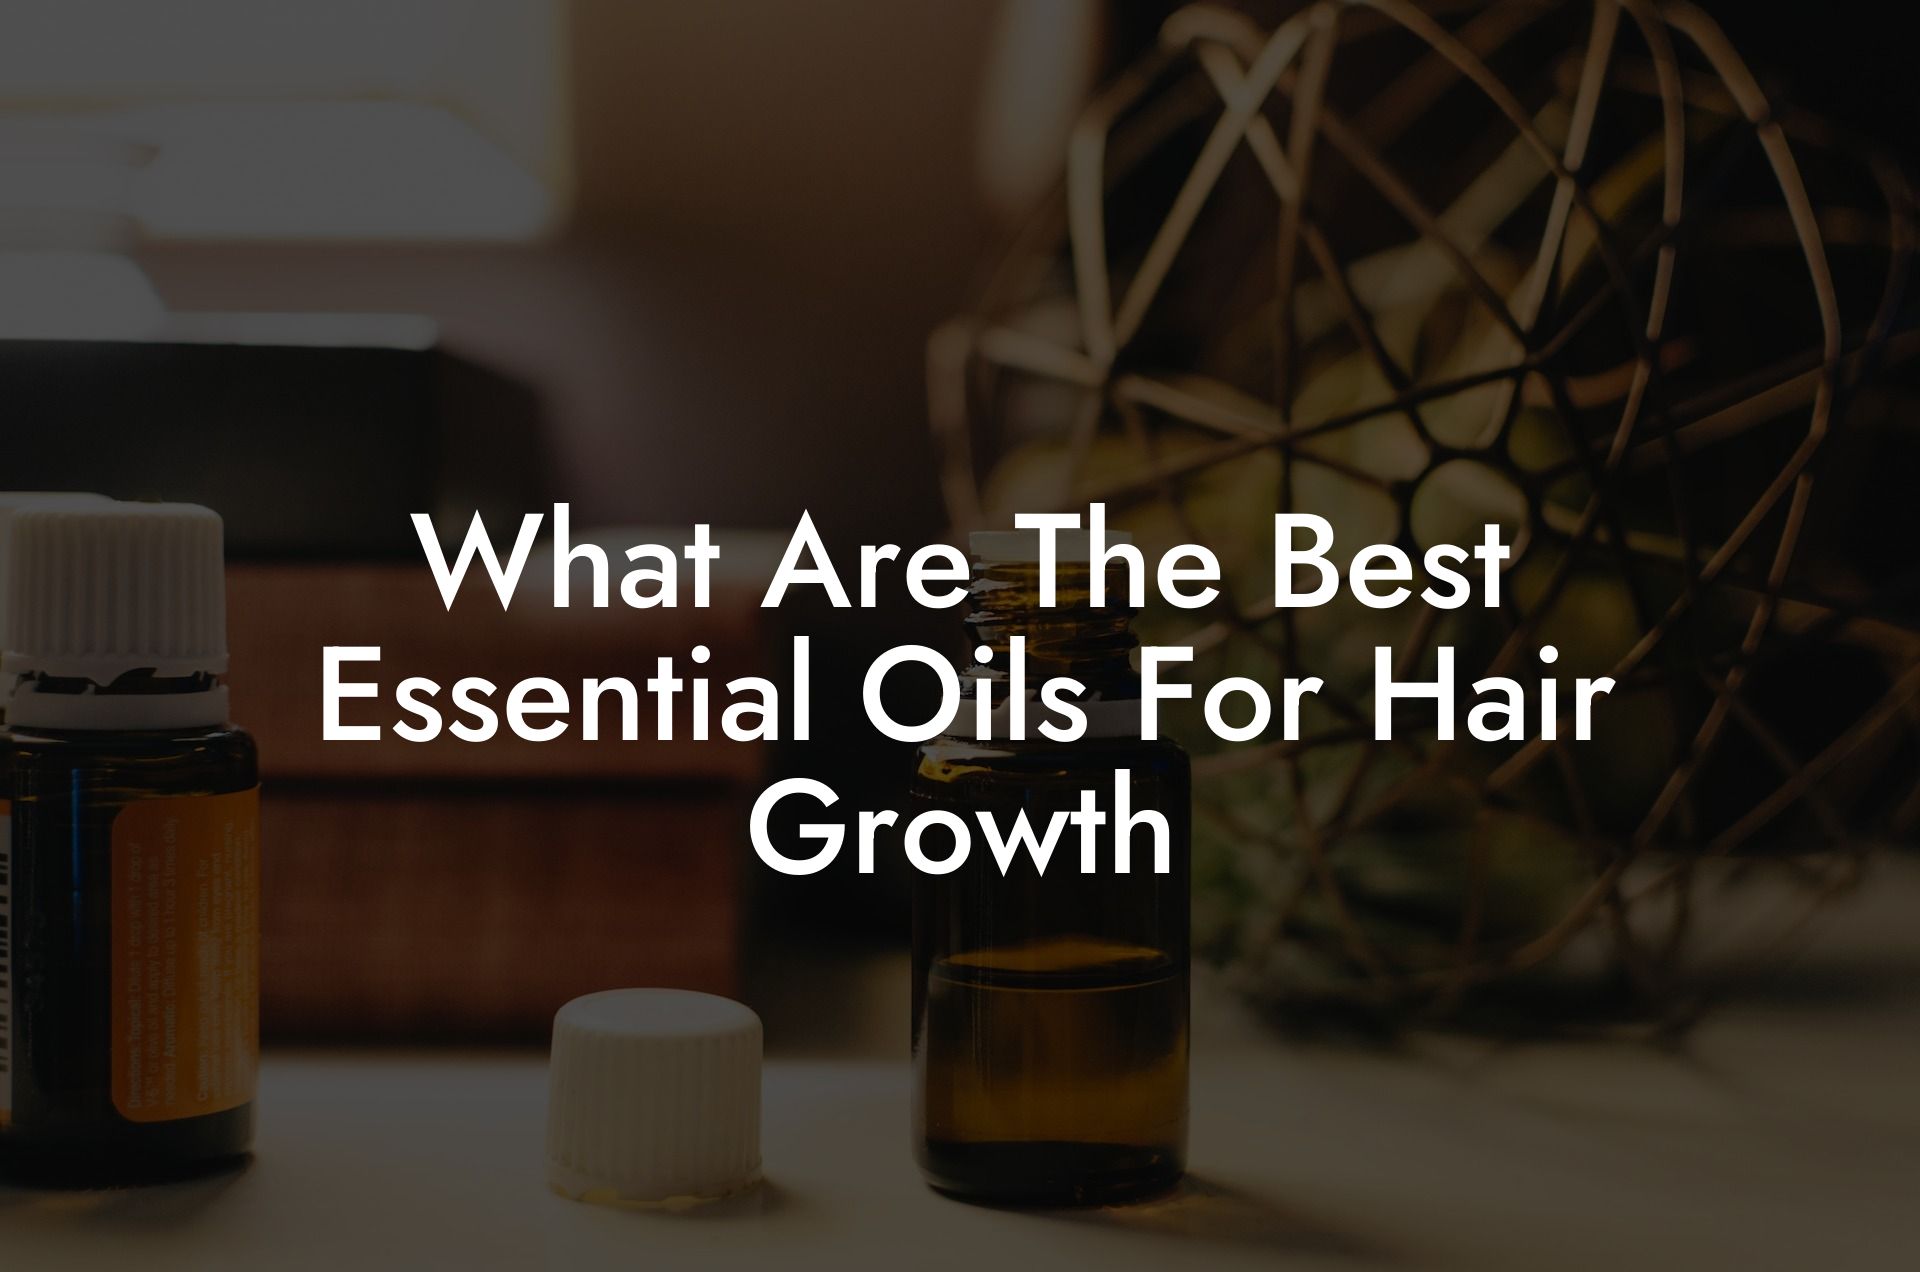 What Are The Best Essential Oils For Hair Growth